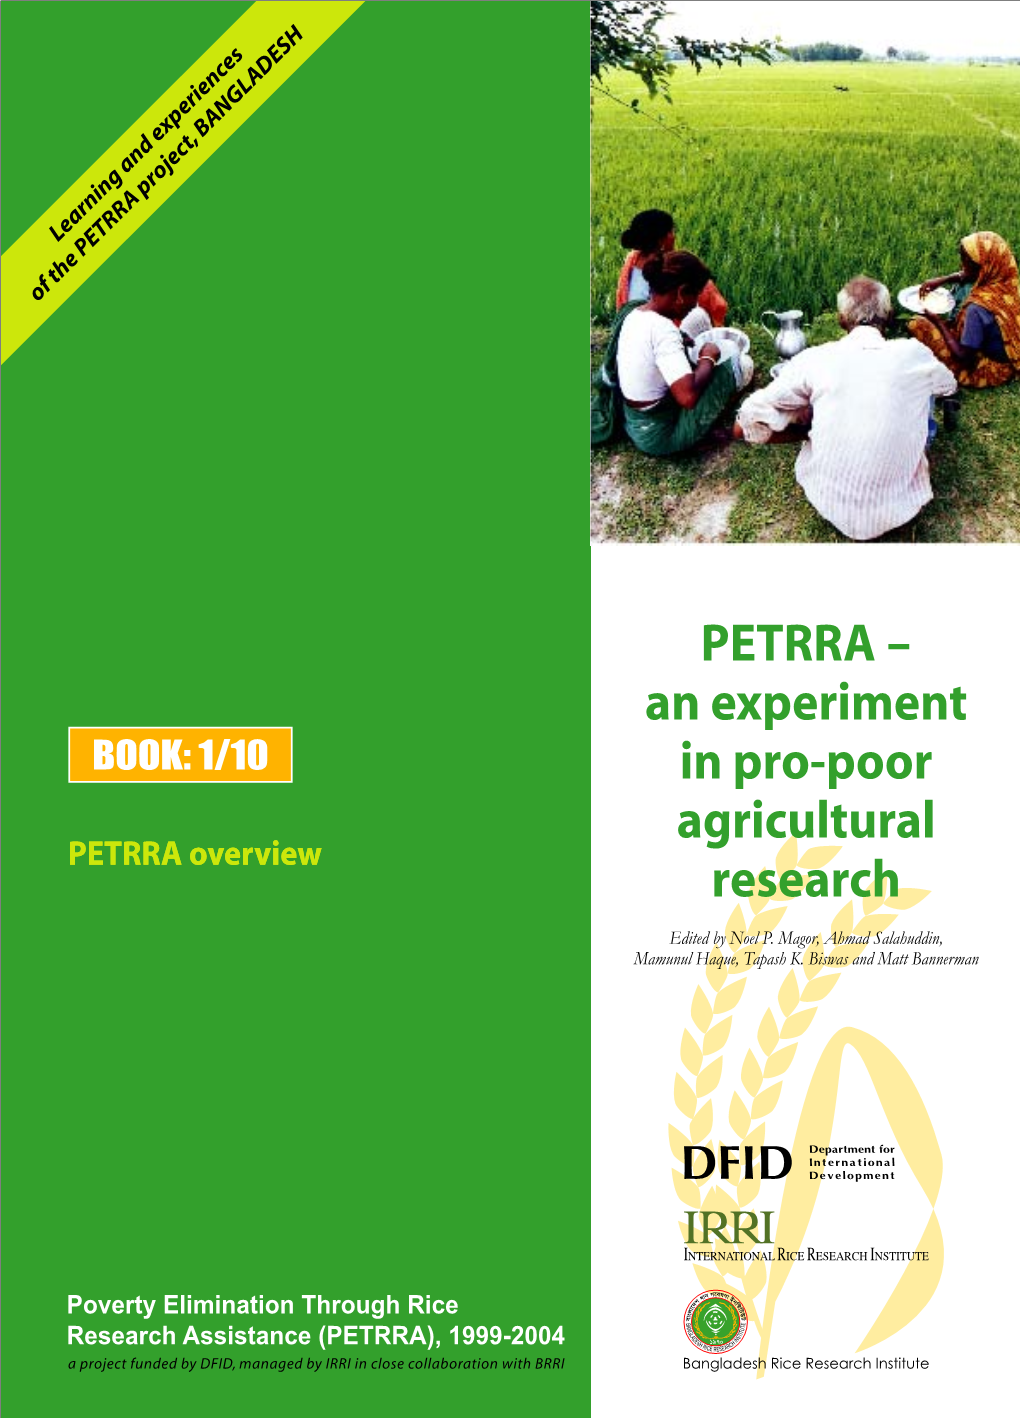 An Experiment in Pro-Poor Agricultural Research PETRRA - an Experiment in Pro-Poor Agricultural Research